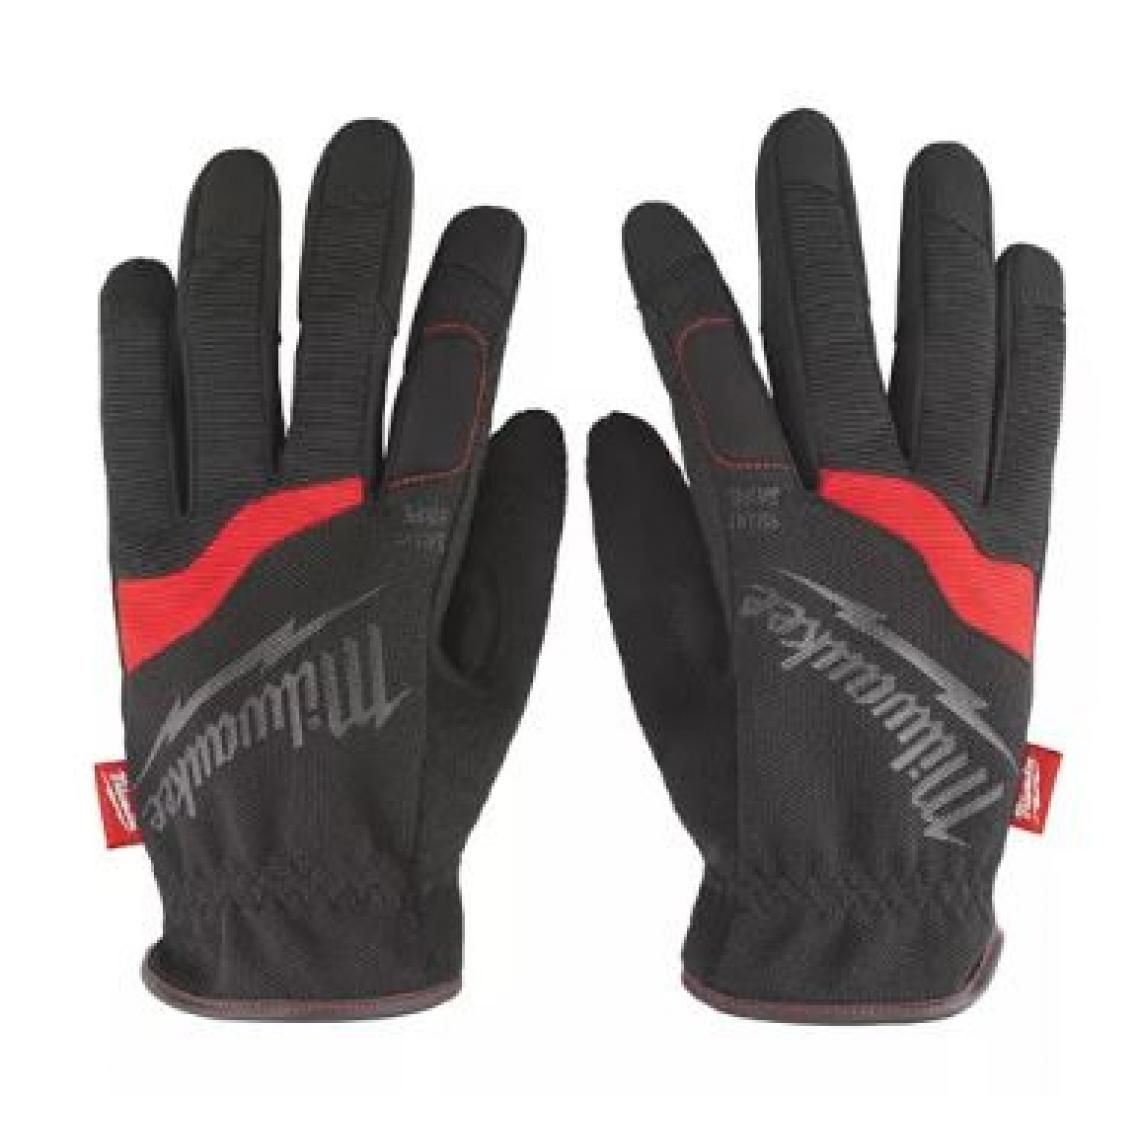 Milwaukee - Gants multi usages souples MILWAUKEE - Taille M/8 - 48229711 - Protections pieds et mains